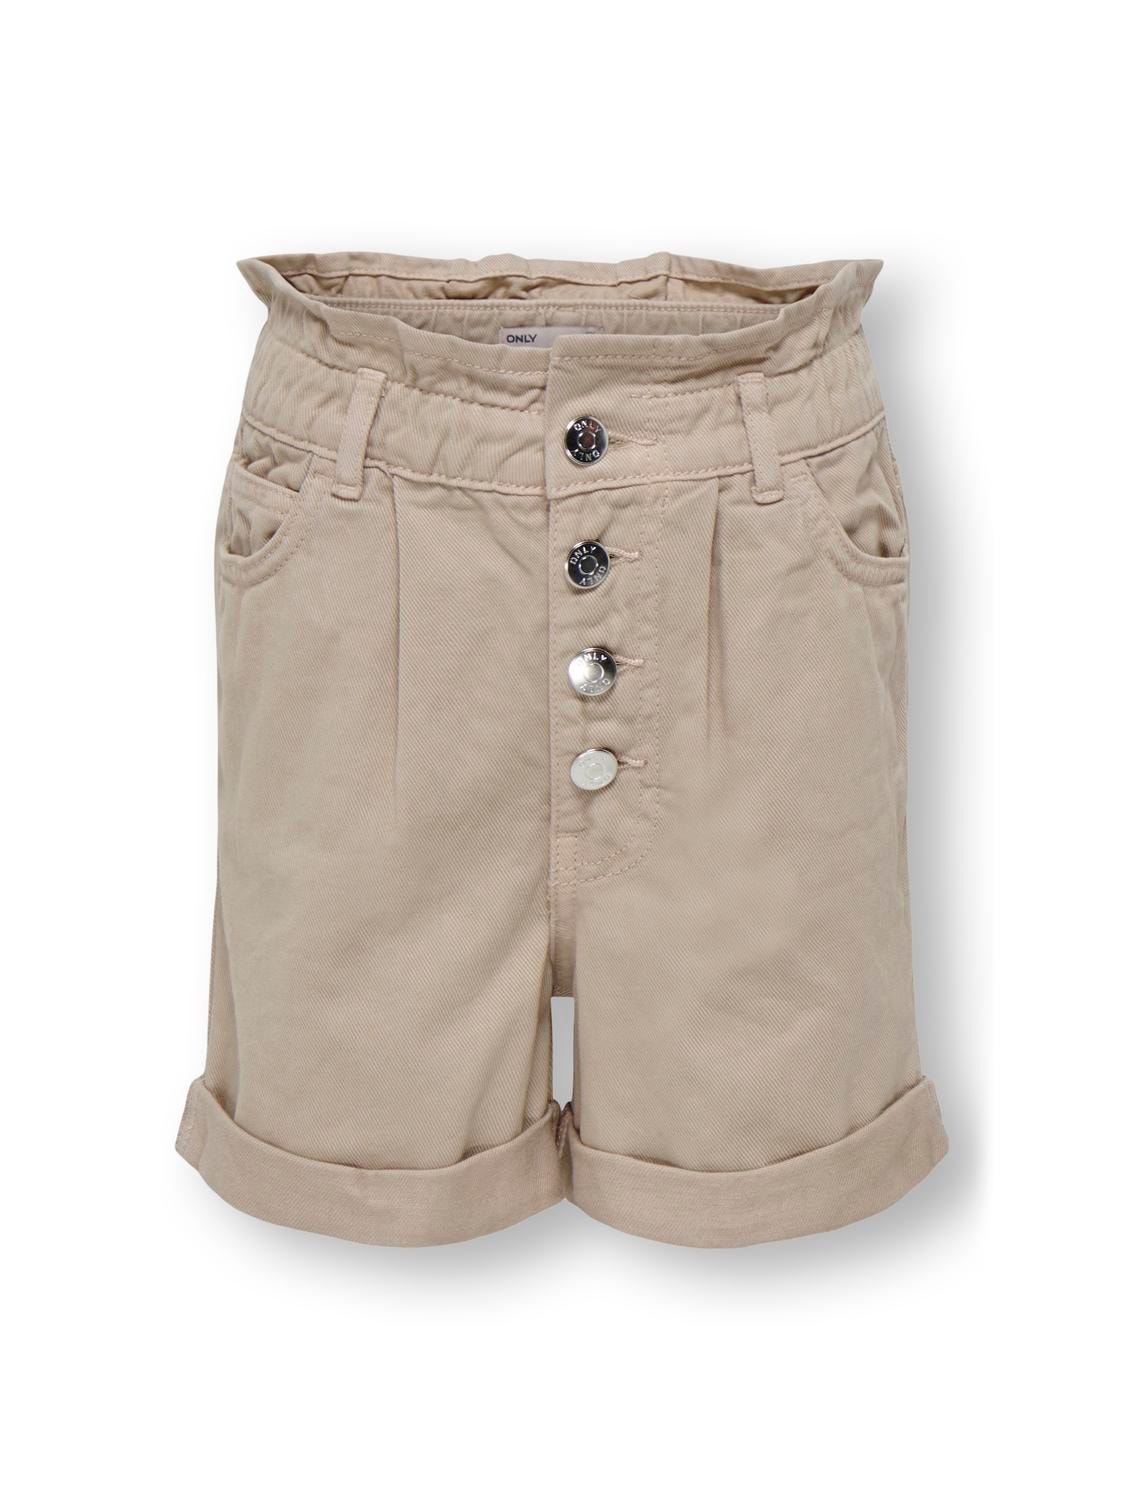 ONLY Baggy Fit Høy midje Shorts -Oxford Tan - 15293657